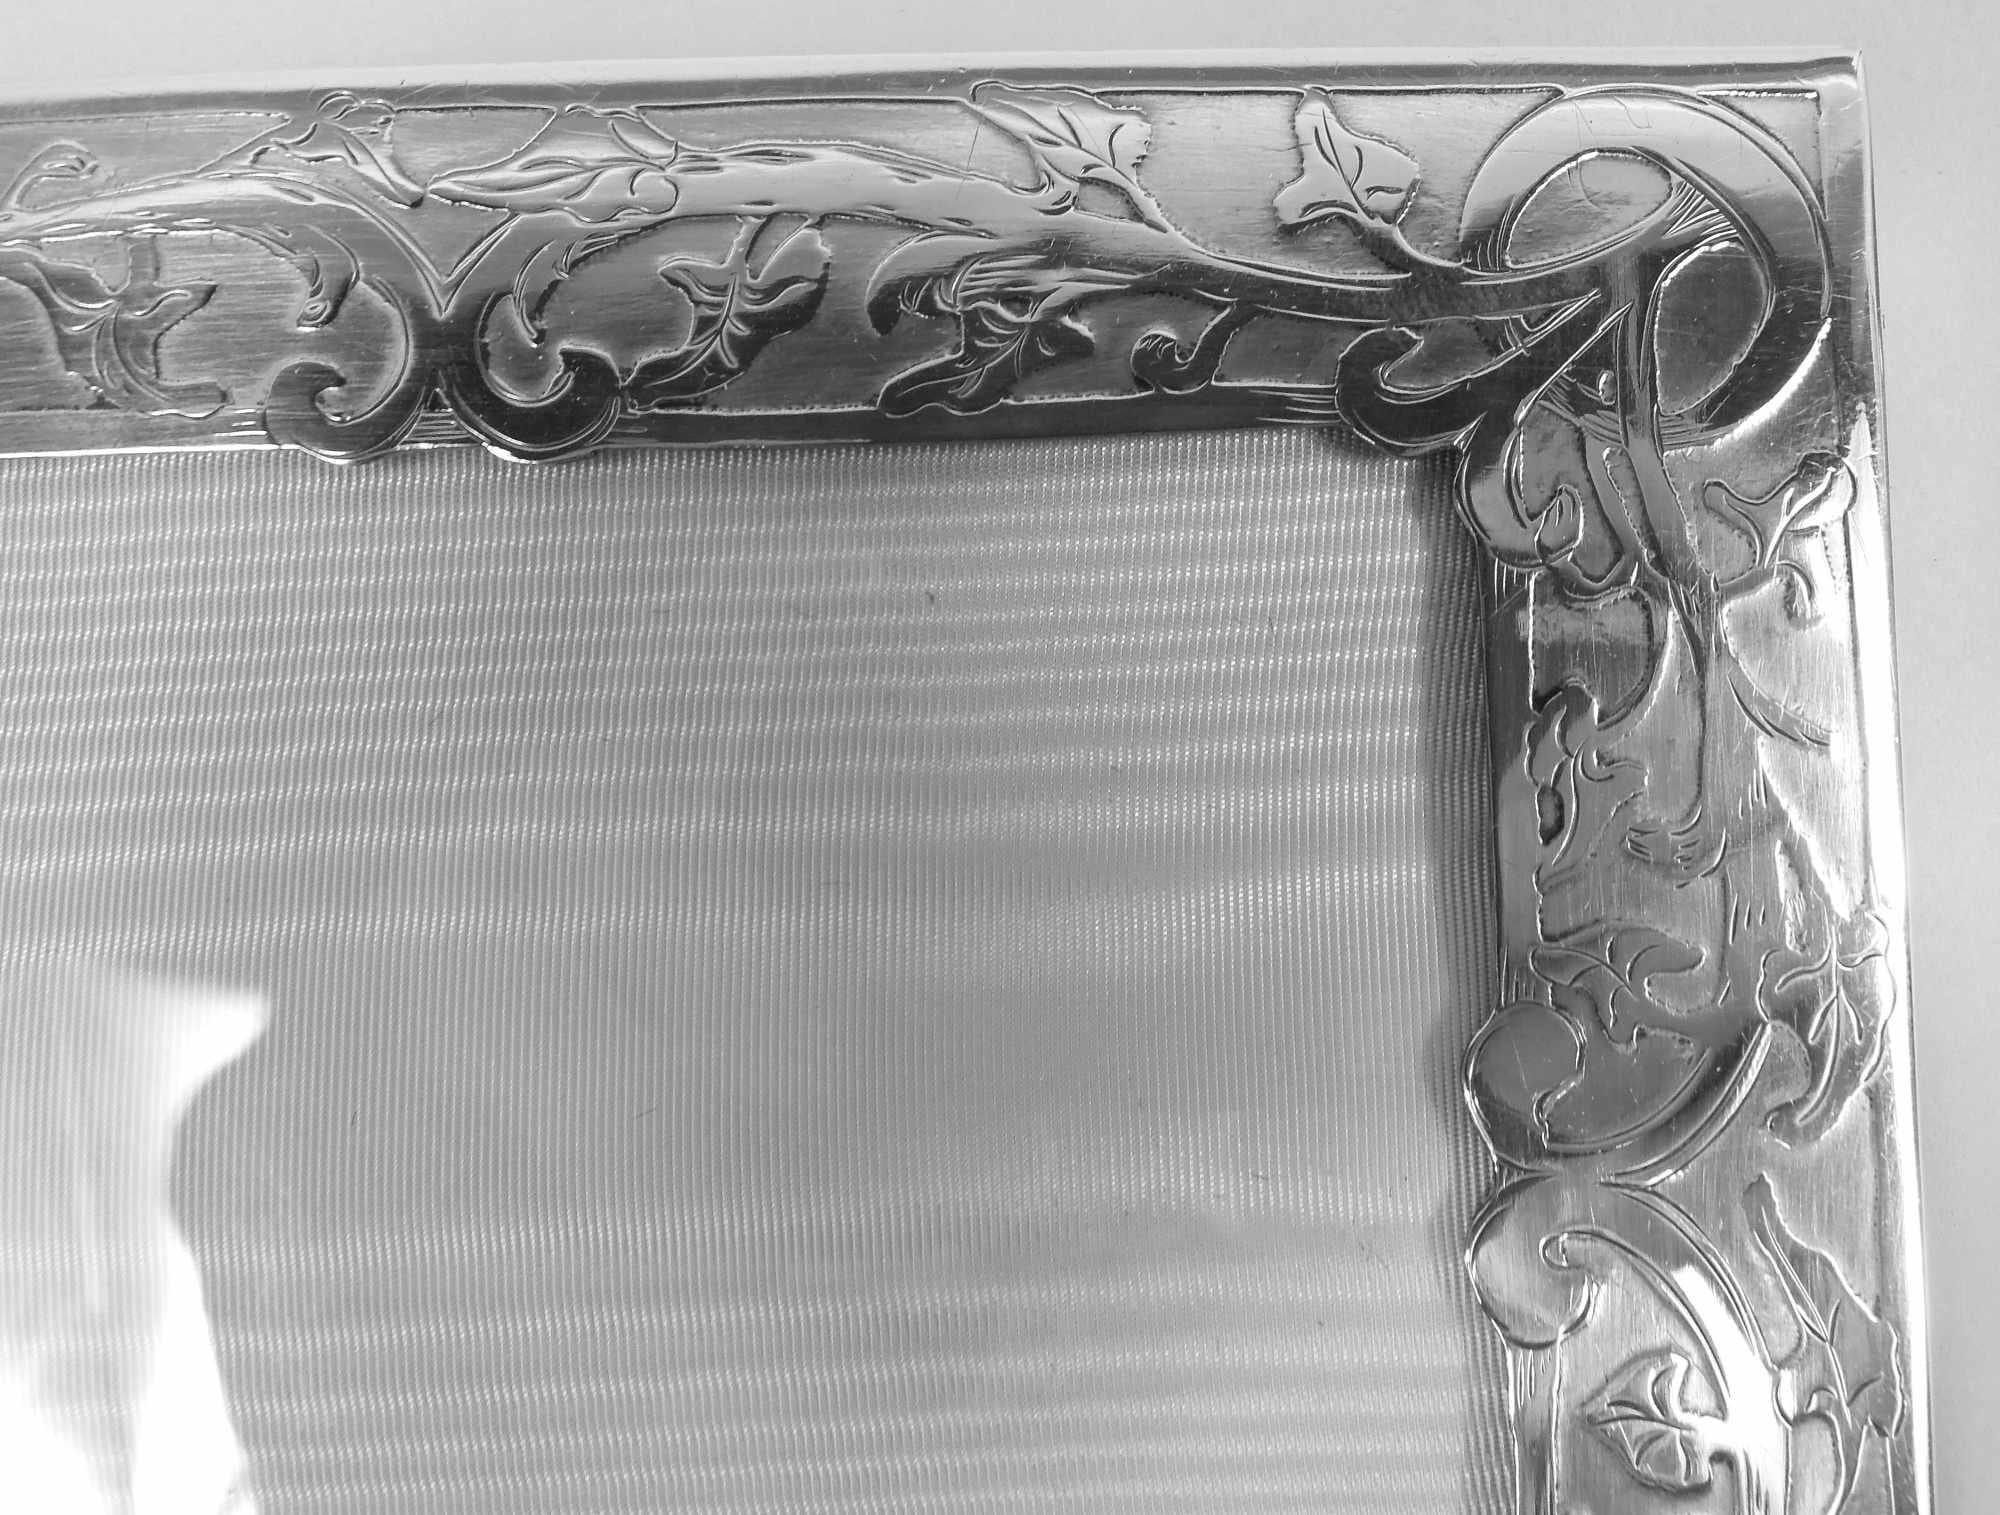 Pretty Art Nouveau sterling silver picture frame. Made by Meriden Britannia (part of International) in Connecticut, ca 1900. Rectangular window in flat surround with irregular interior rim. On front acid-etched wraparound scrolling leafing branch